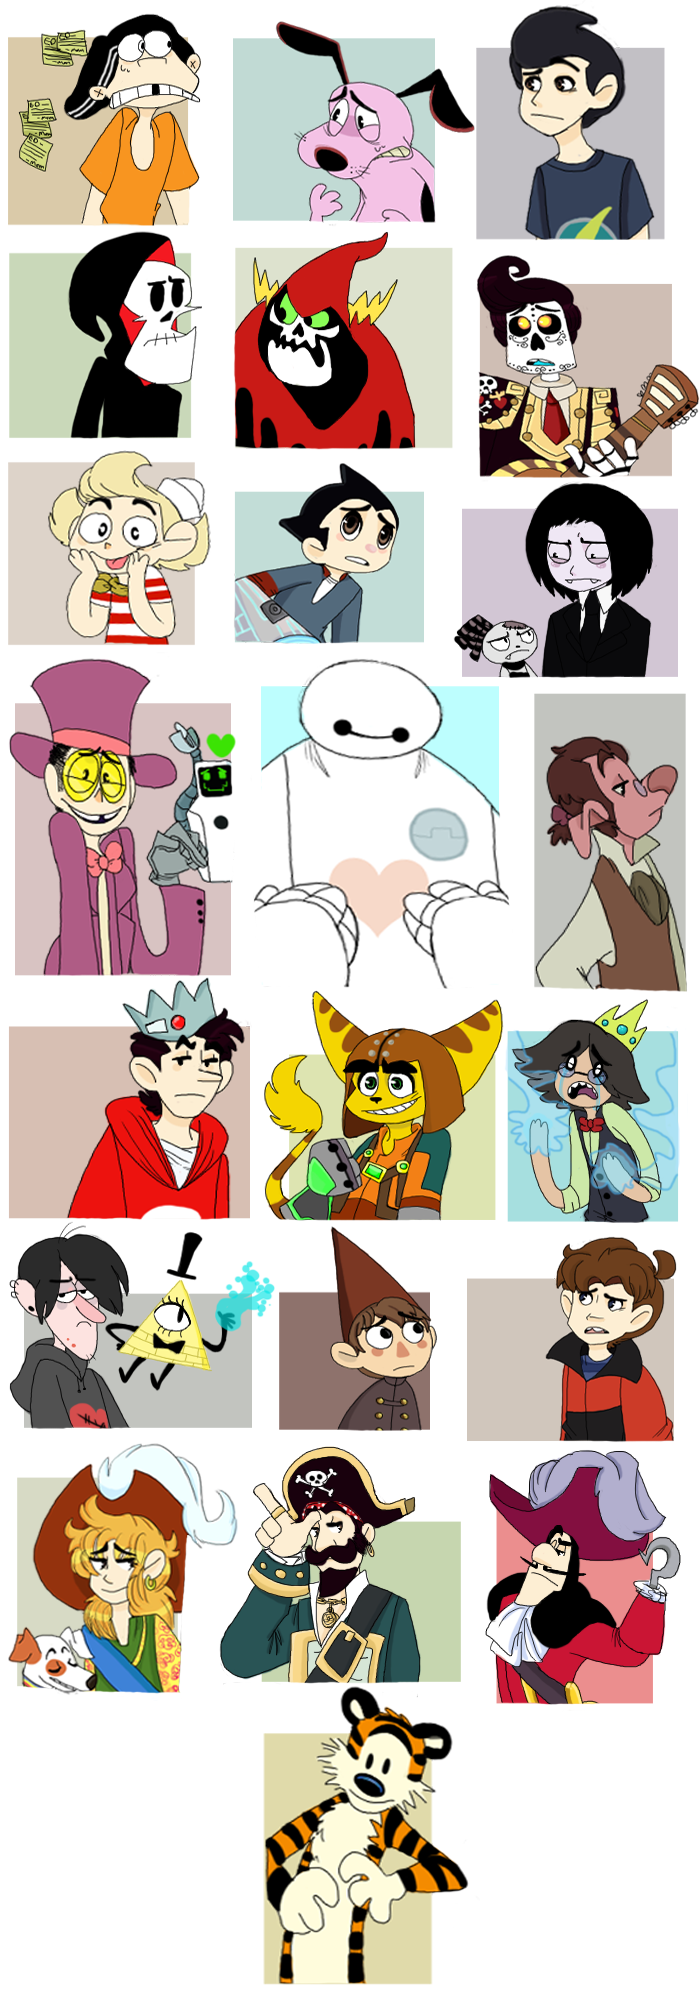 Undertale Characters by BlueOrca2000 on DeviantArt